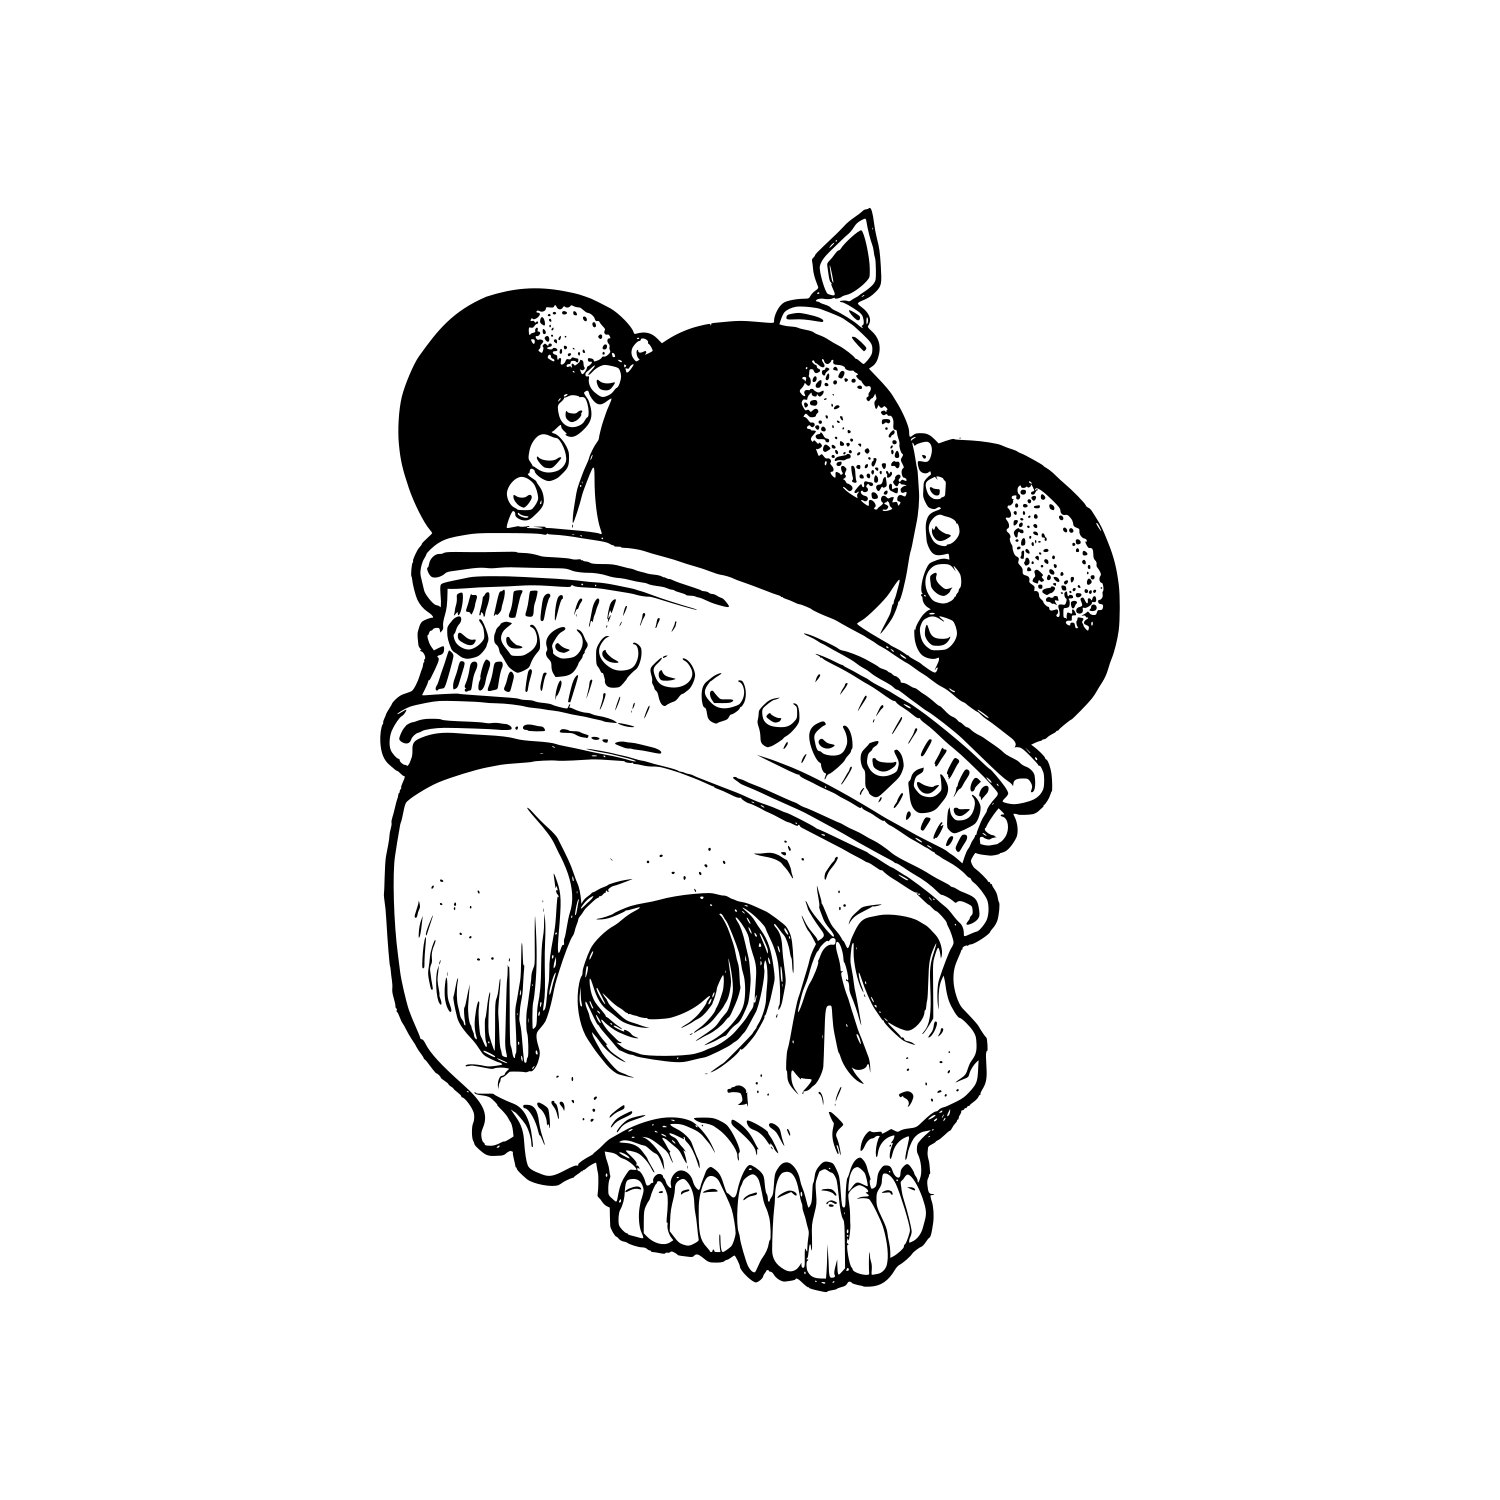 Skull Crown Drawing - Skull With Crown Drawing. 